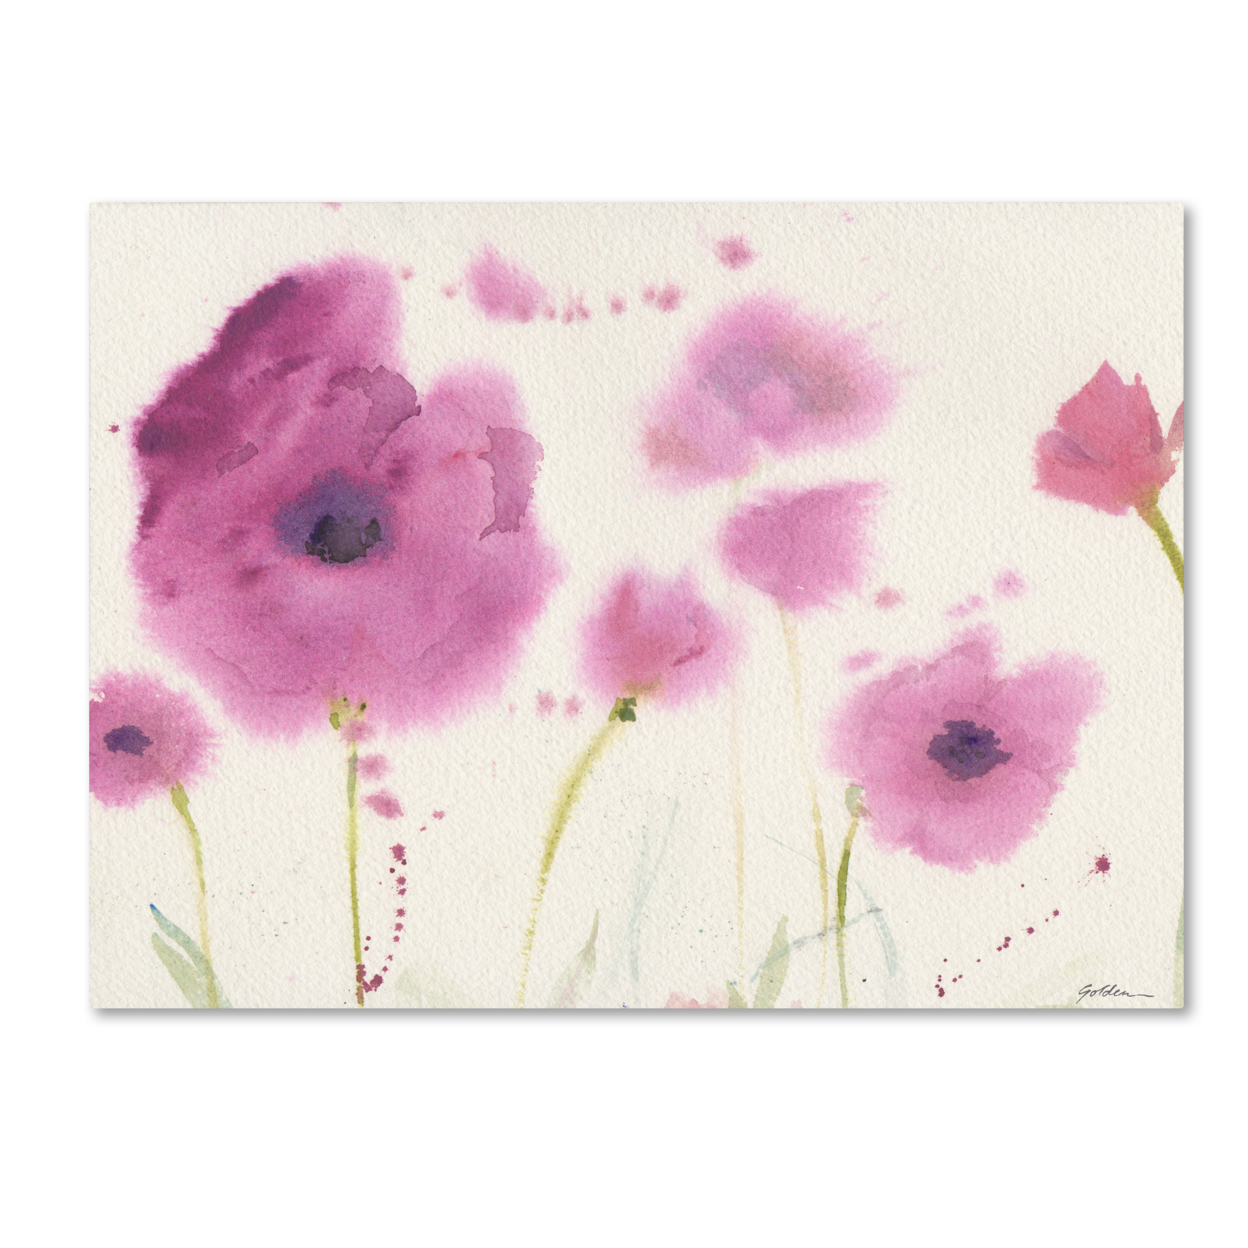 Sheila Golden 'Purple Poppies' Canvas Wall Art 35 X 47 Inches